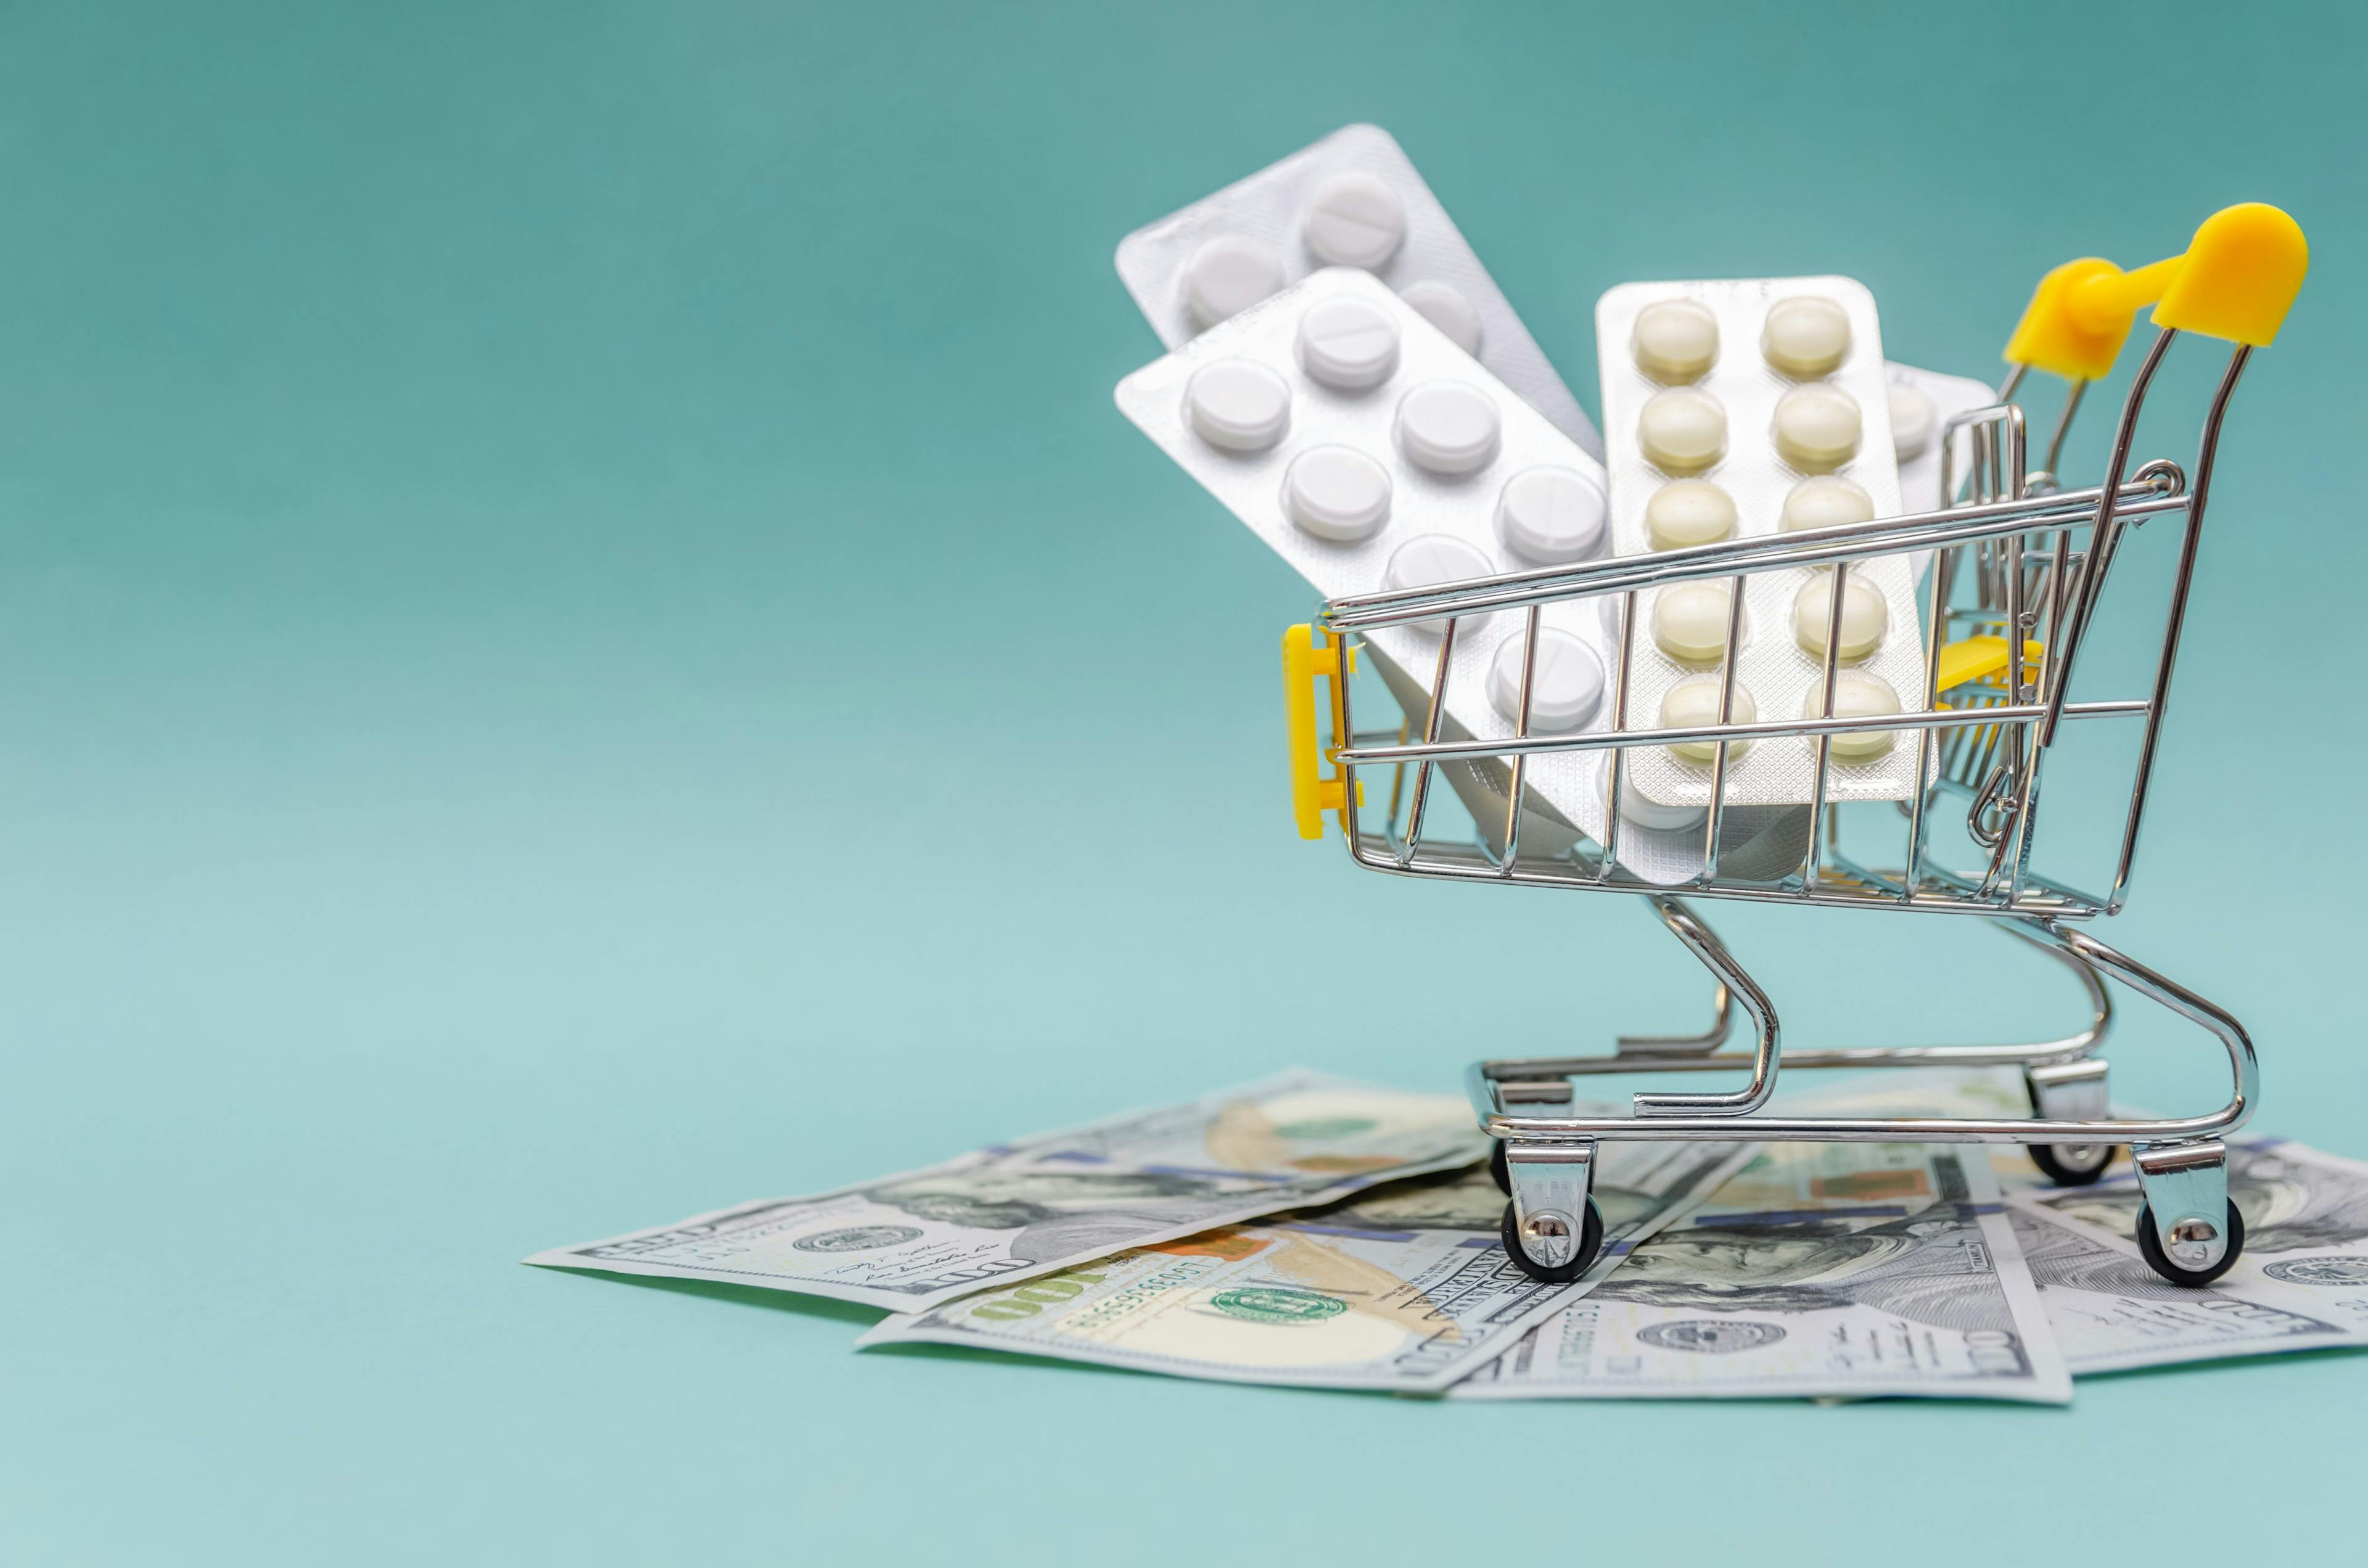 Many pharmacies across the U.S. could be shutting their doors this year because of rising drug costs and low reimbursements. | image credit: yaroslav1986 - stock.adobe.com